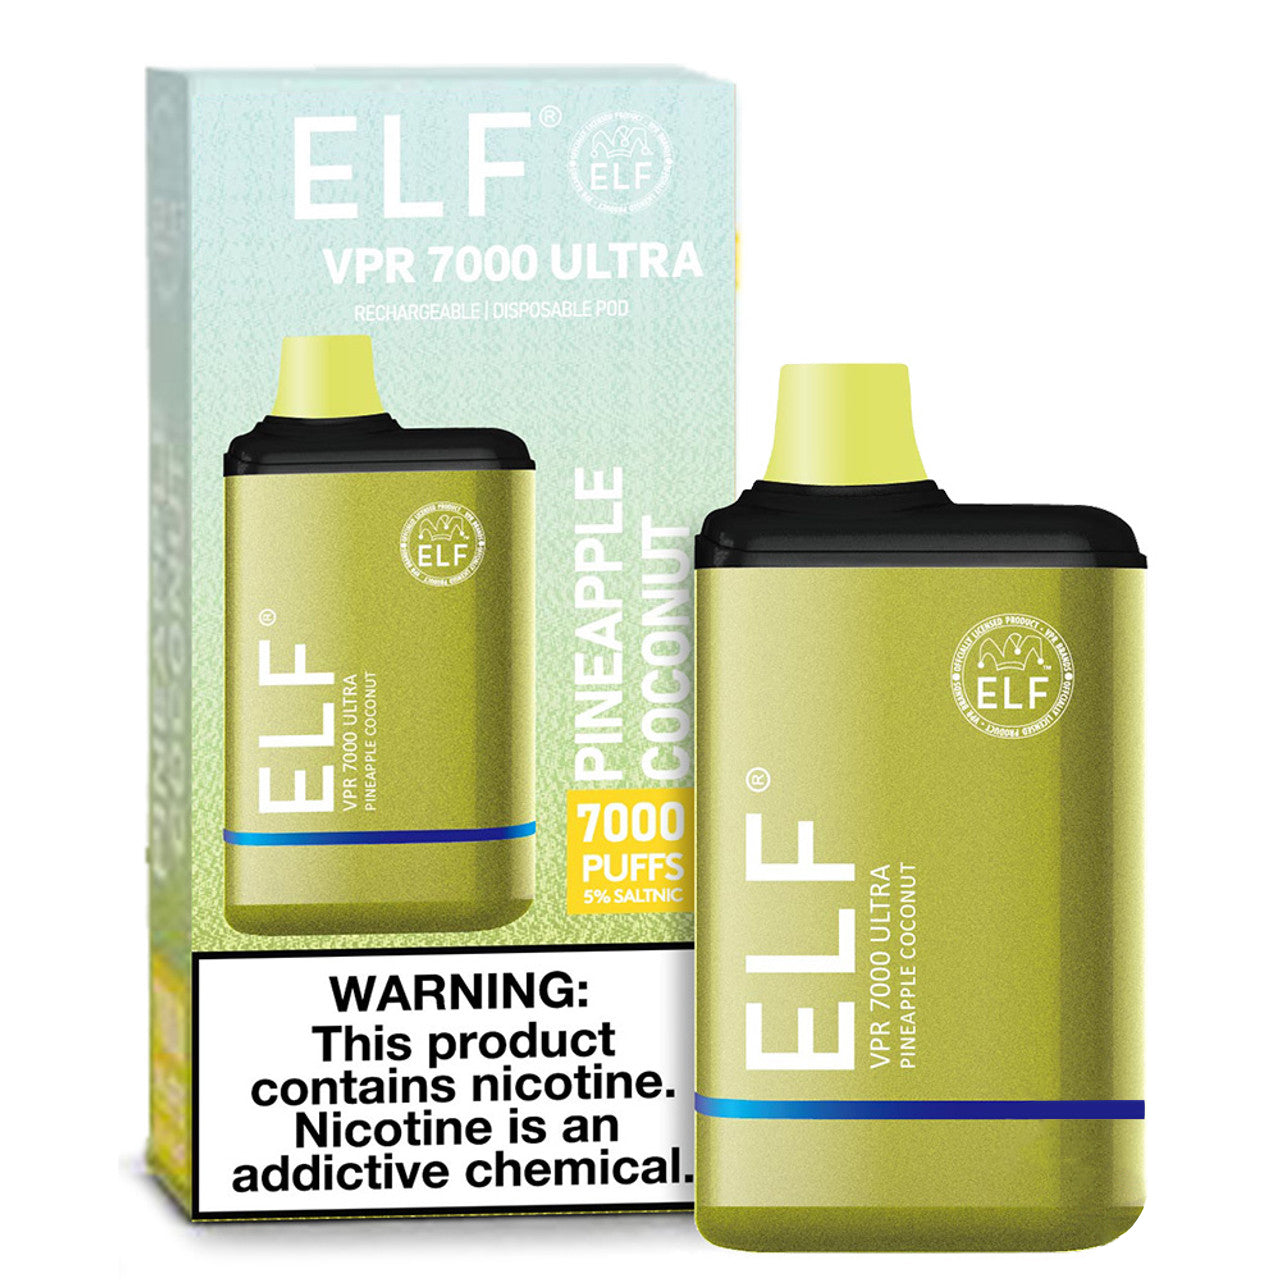 ELF VPR ULTRA 7000 PUFFS DISPOSABLE 7K 5% - Pineapple Coconut